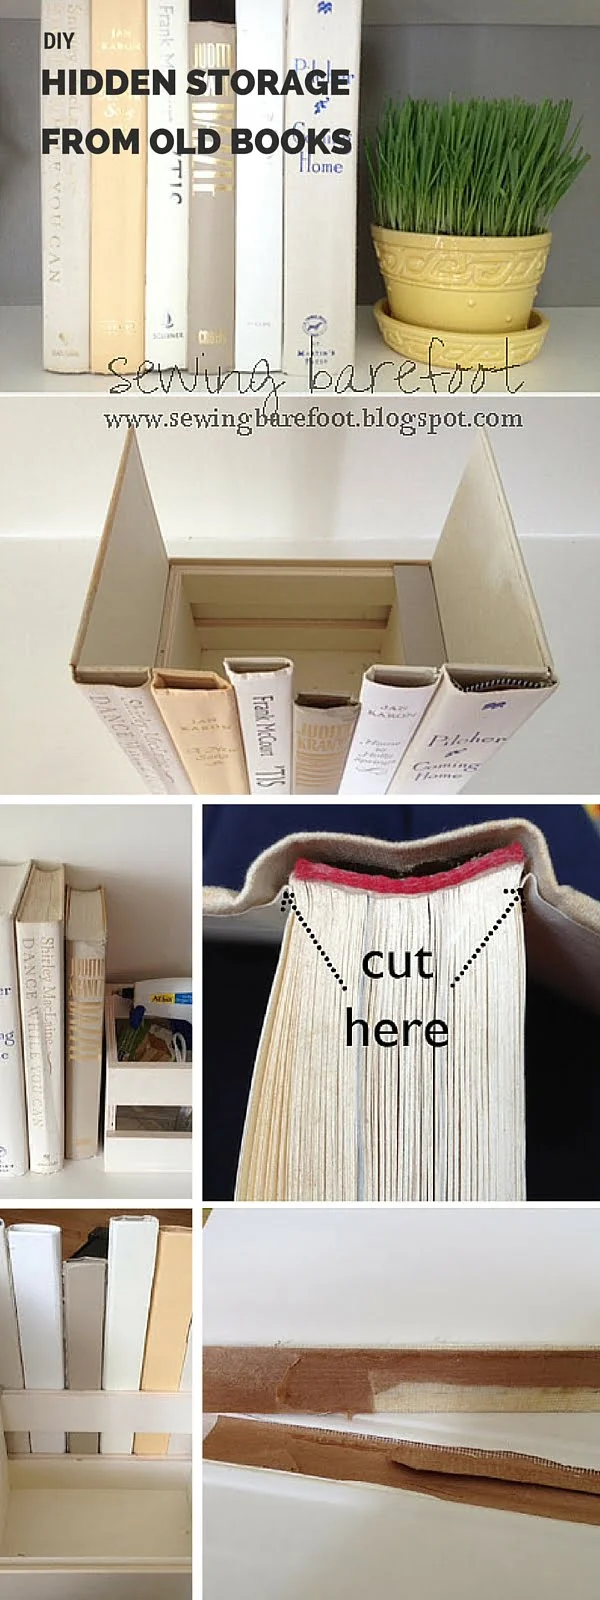 Check out the tutorial:  Hidden Storage from Old Books  